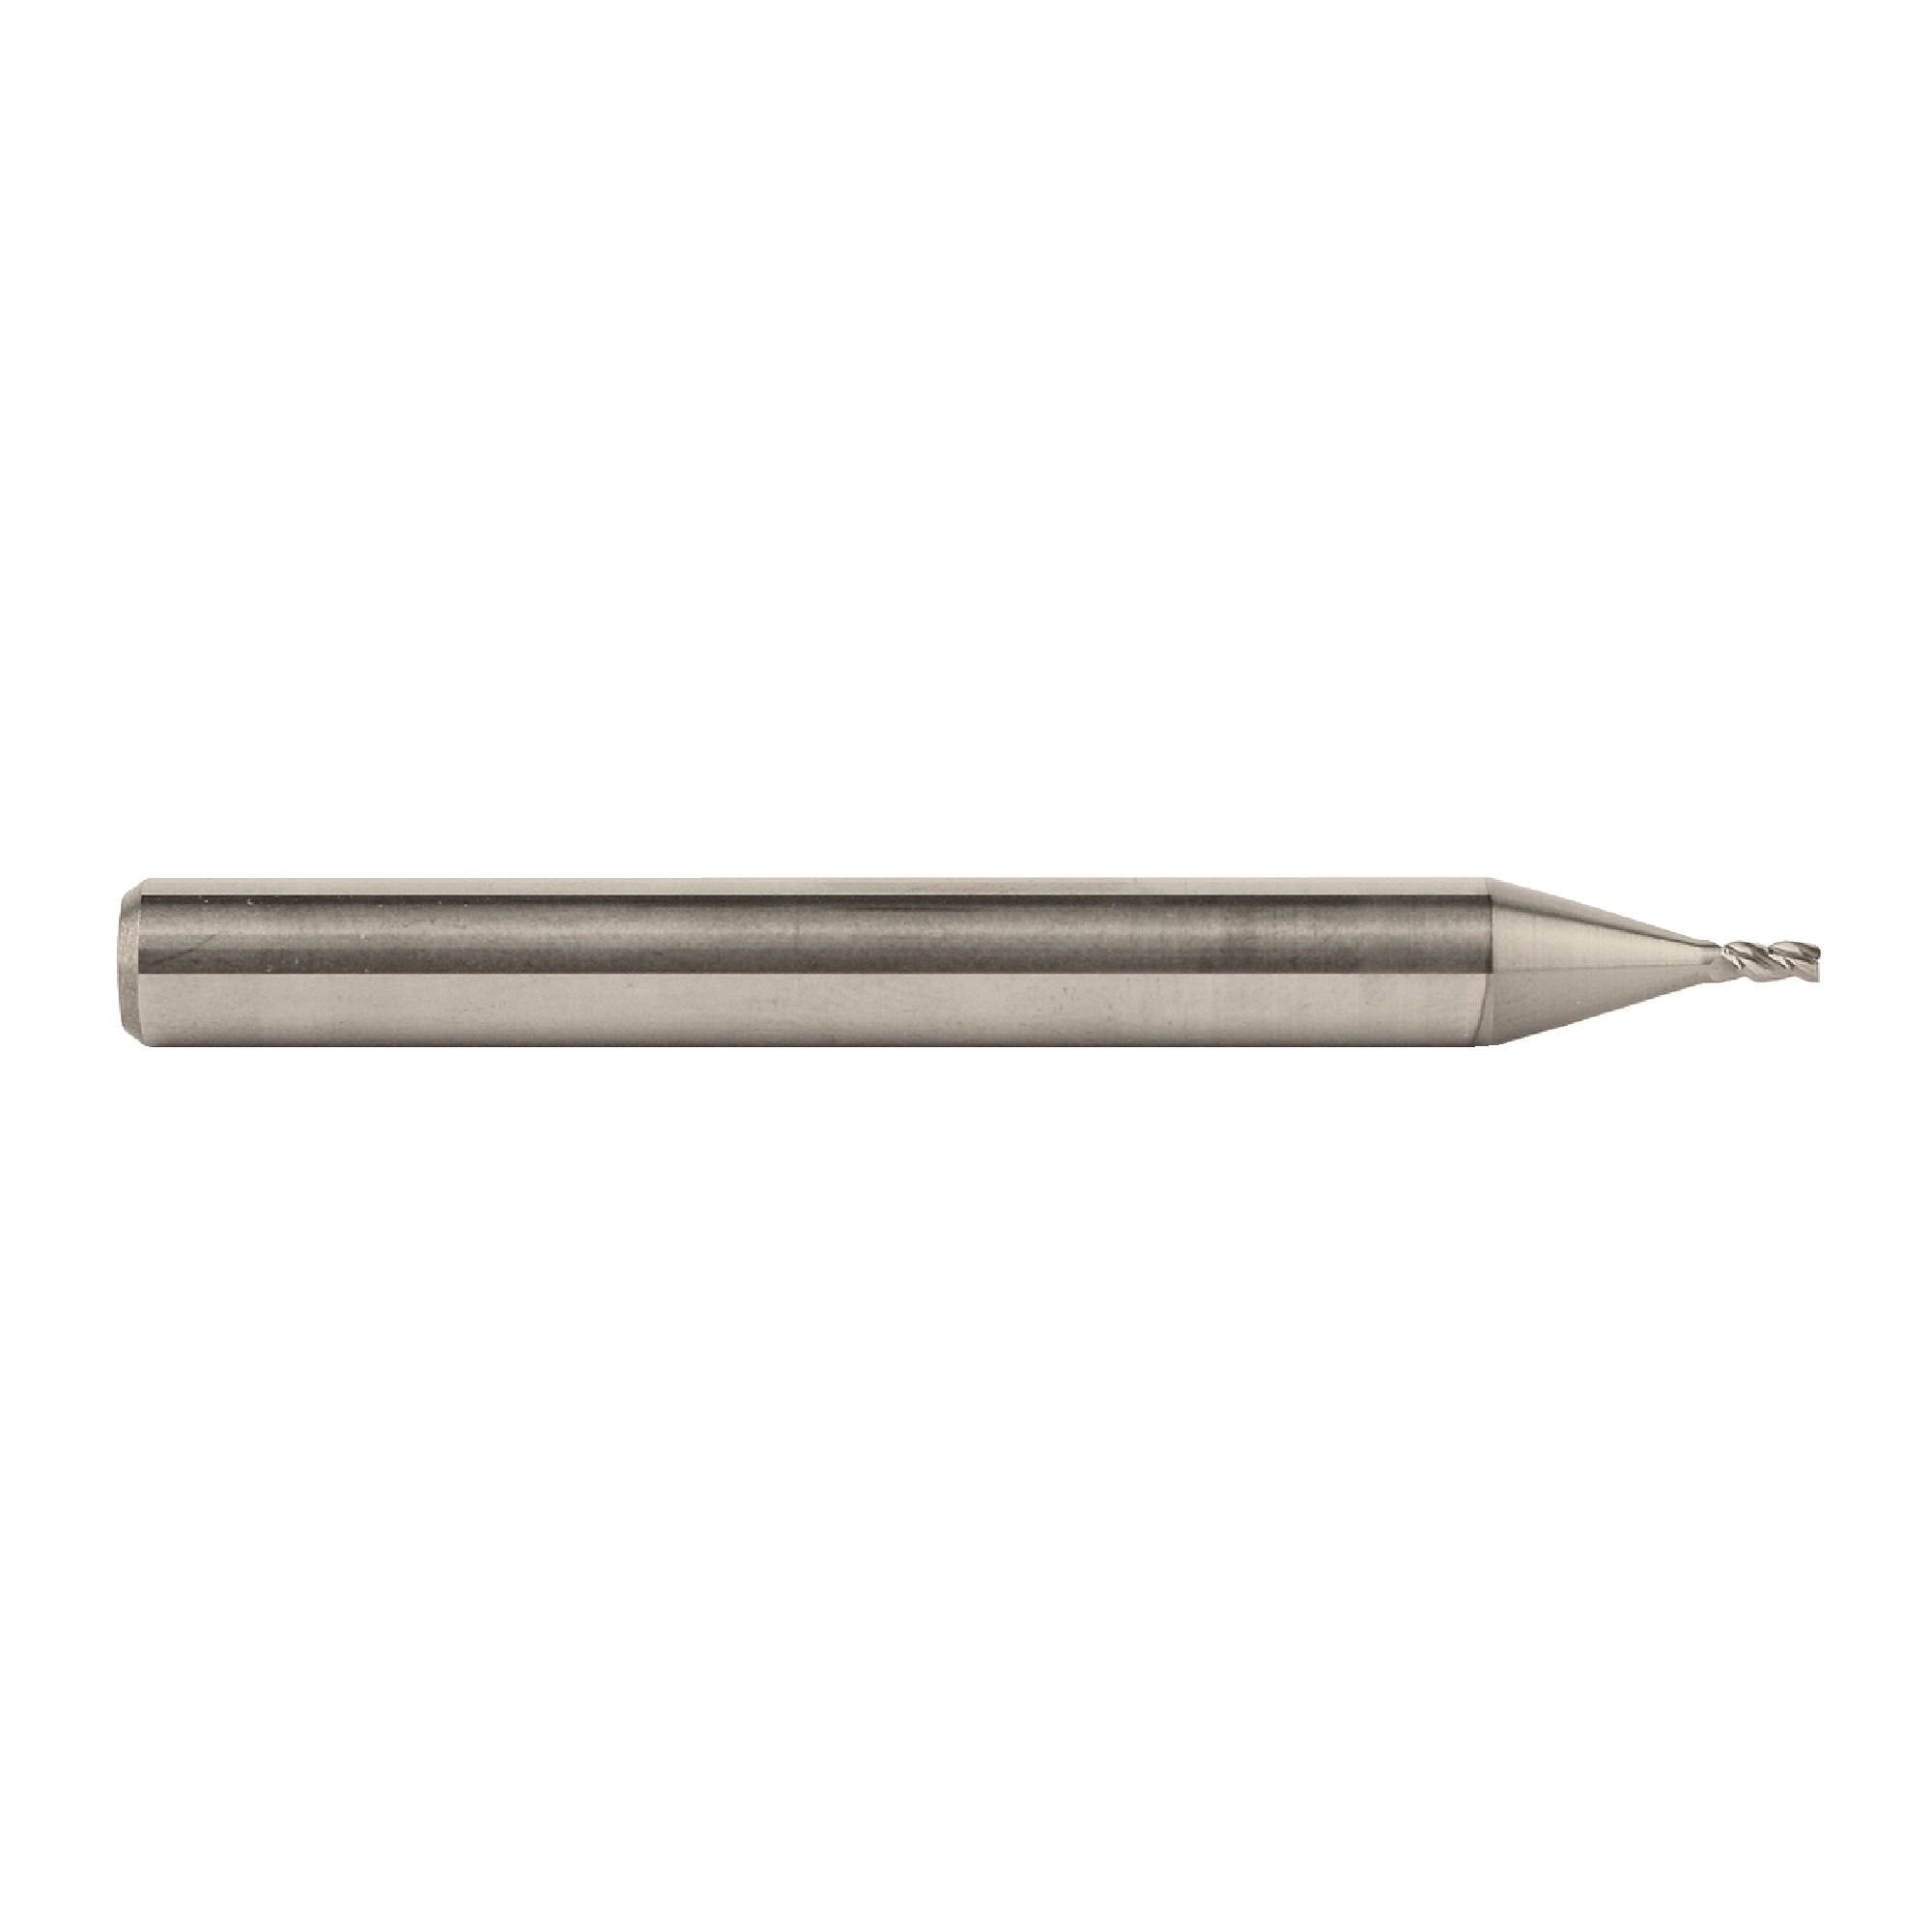 1/4" Shank Solid Carbide 3 Flute Single End Mill